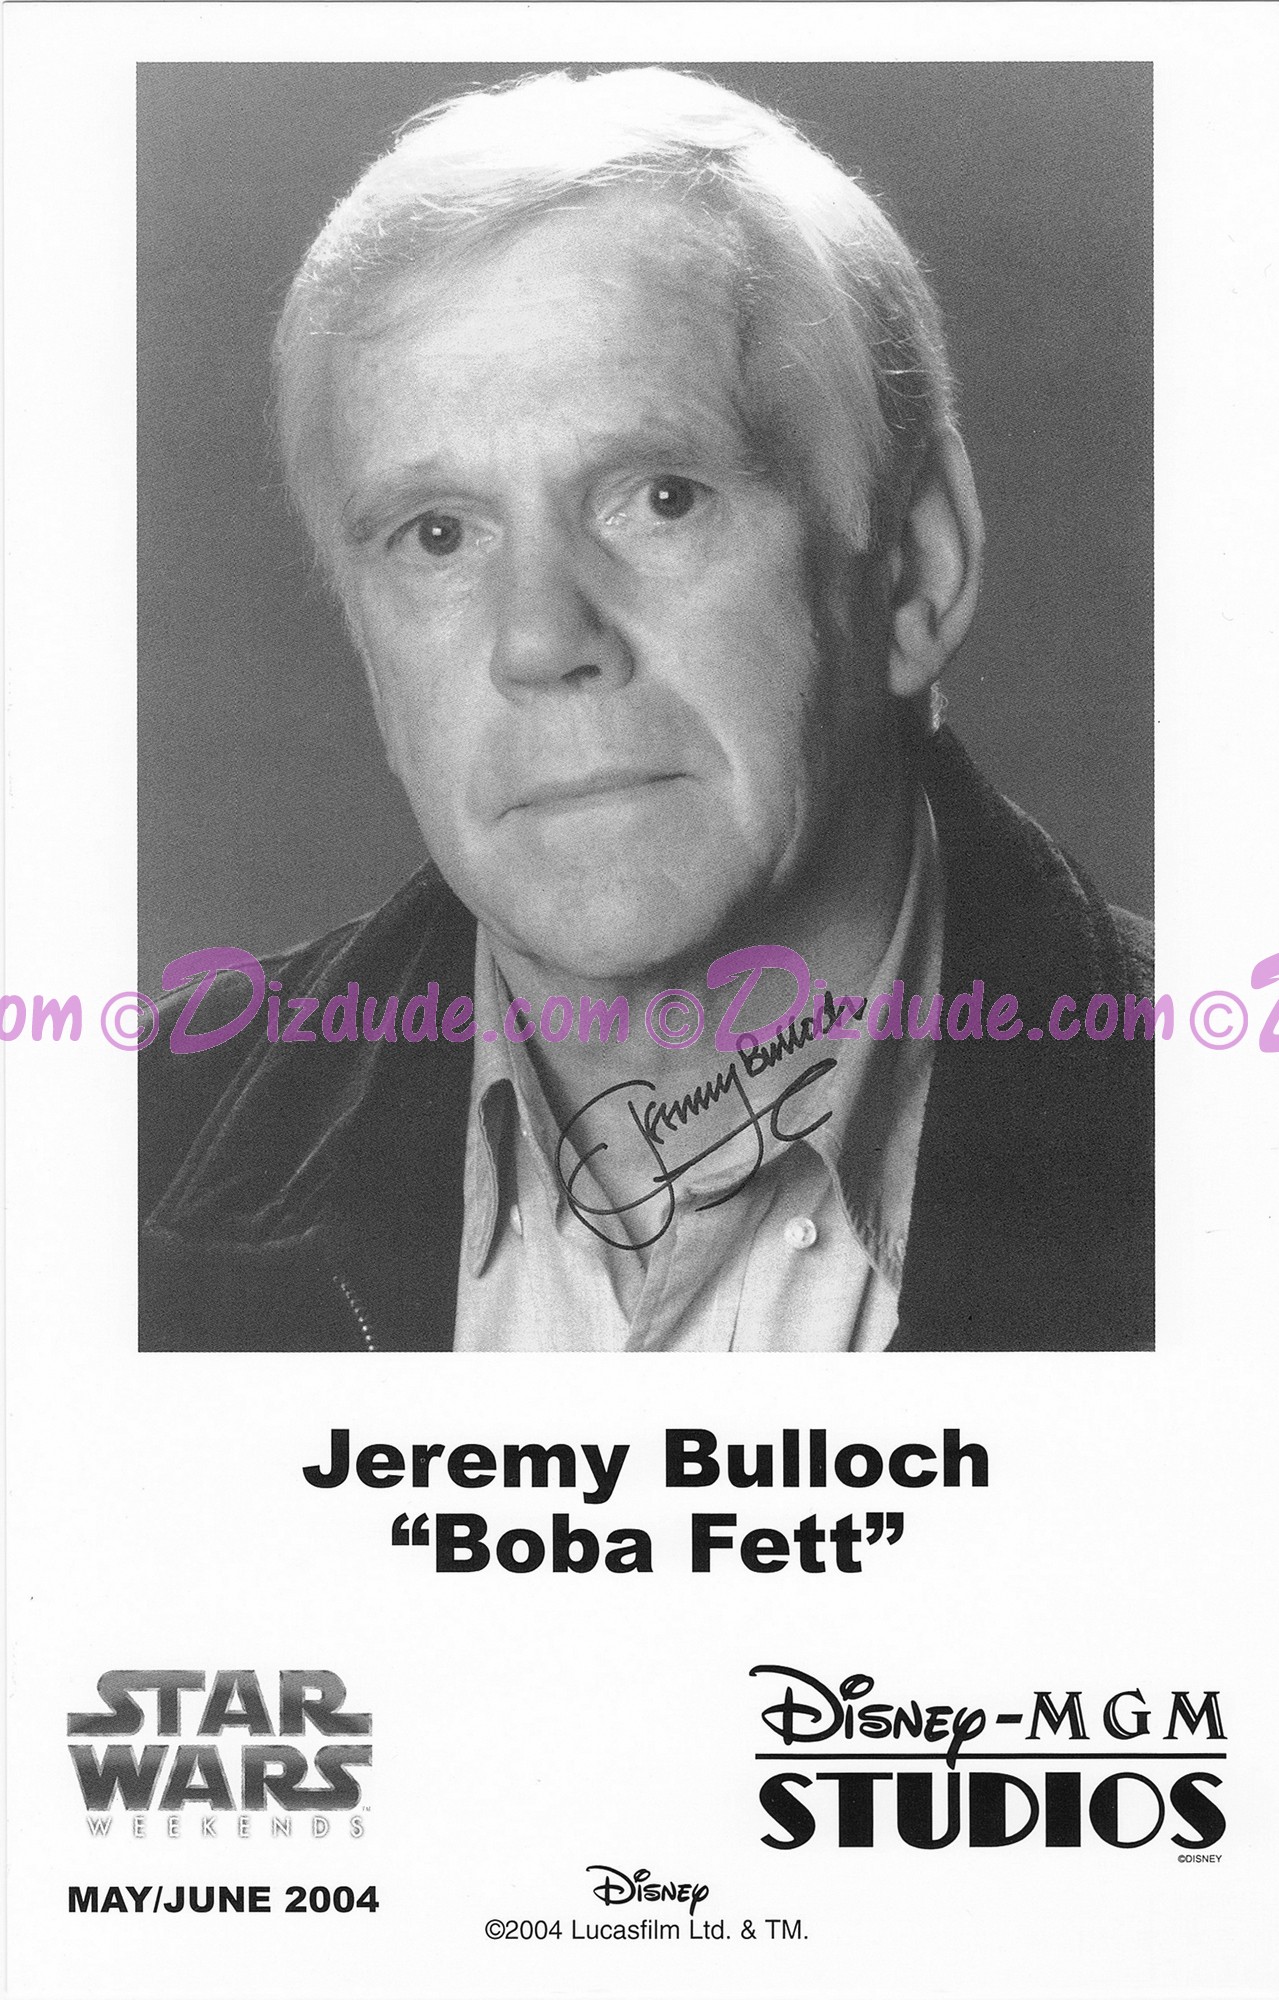 Jeremy Bulloch who played Boba Fett Presigned Official Star Wars Weekends 2004 Celebrity Collector Photo © Dizdude.com